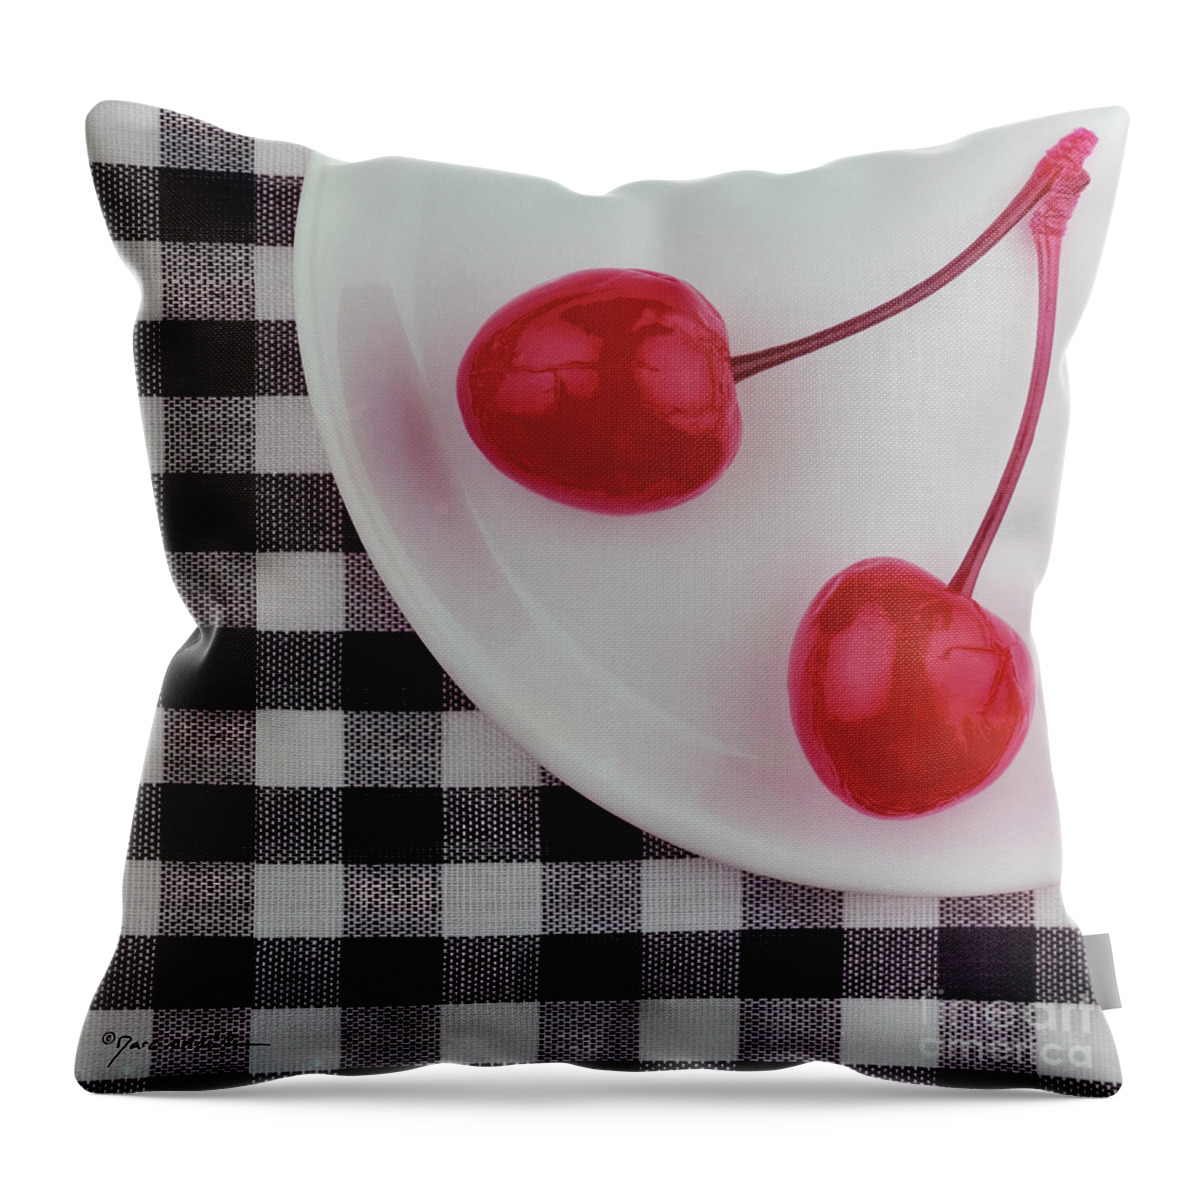 Cherries Throw Pillow featuring the photograph Simply Cherries by Marc Nader